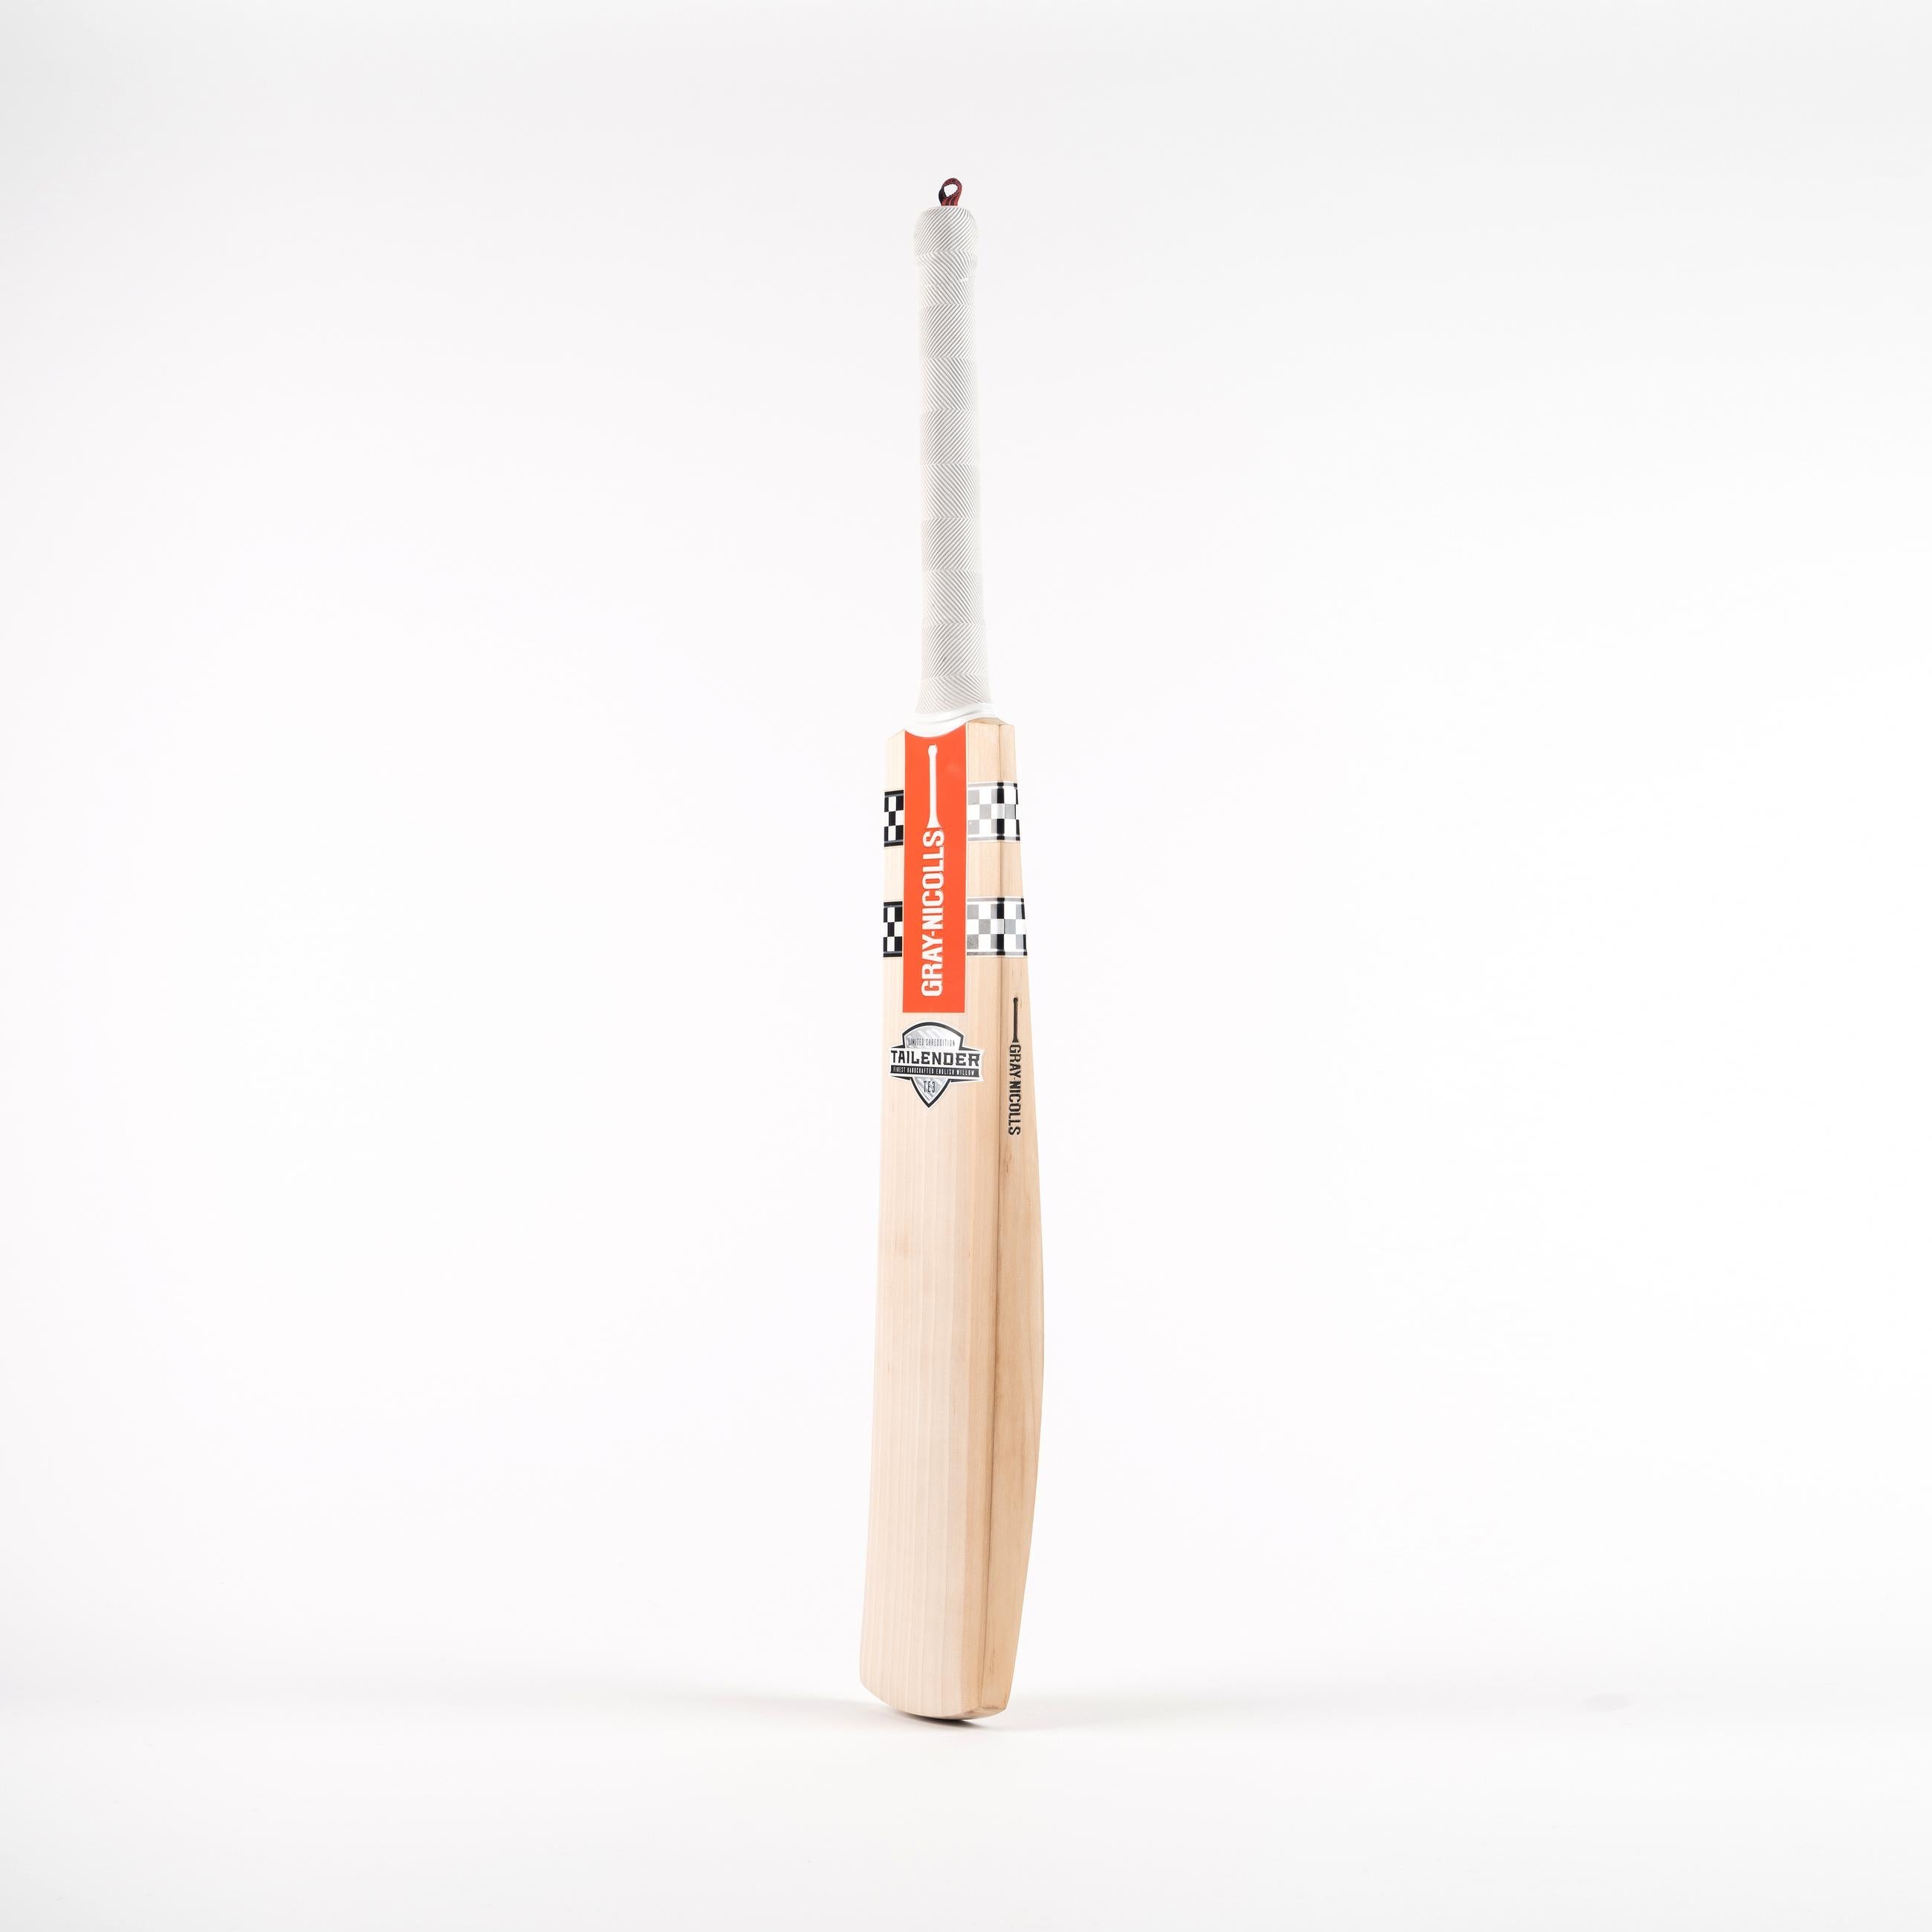 Tailender 3 Players Edition Adult Cricket Bat